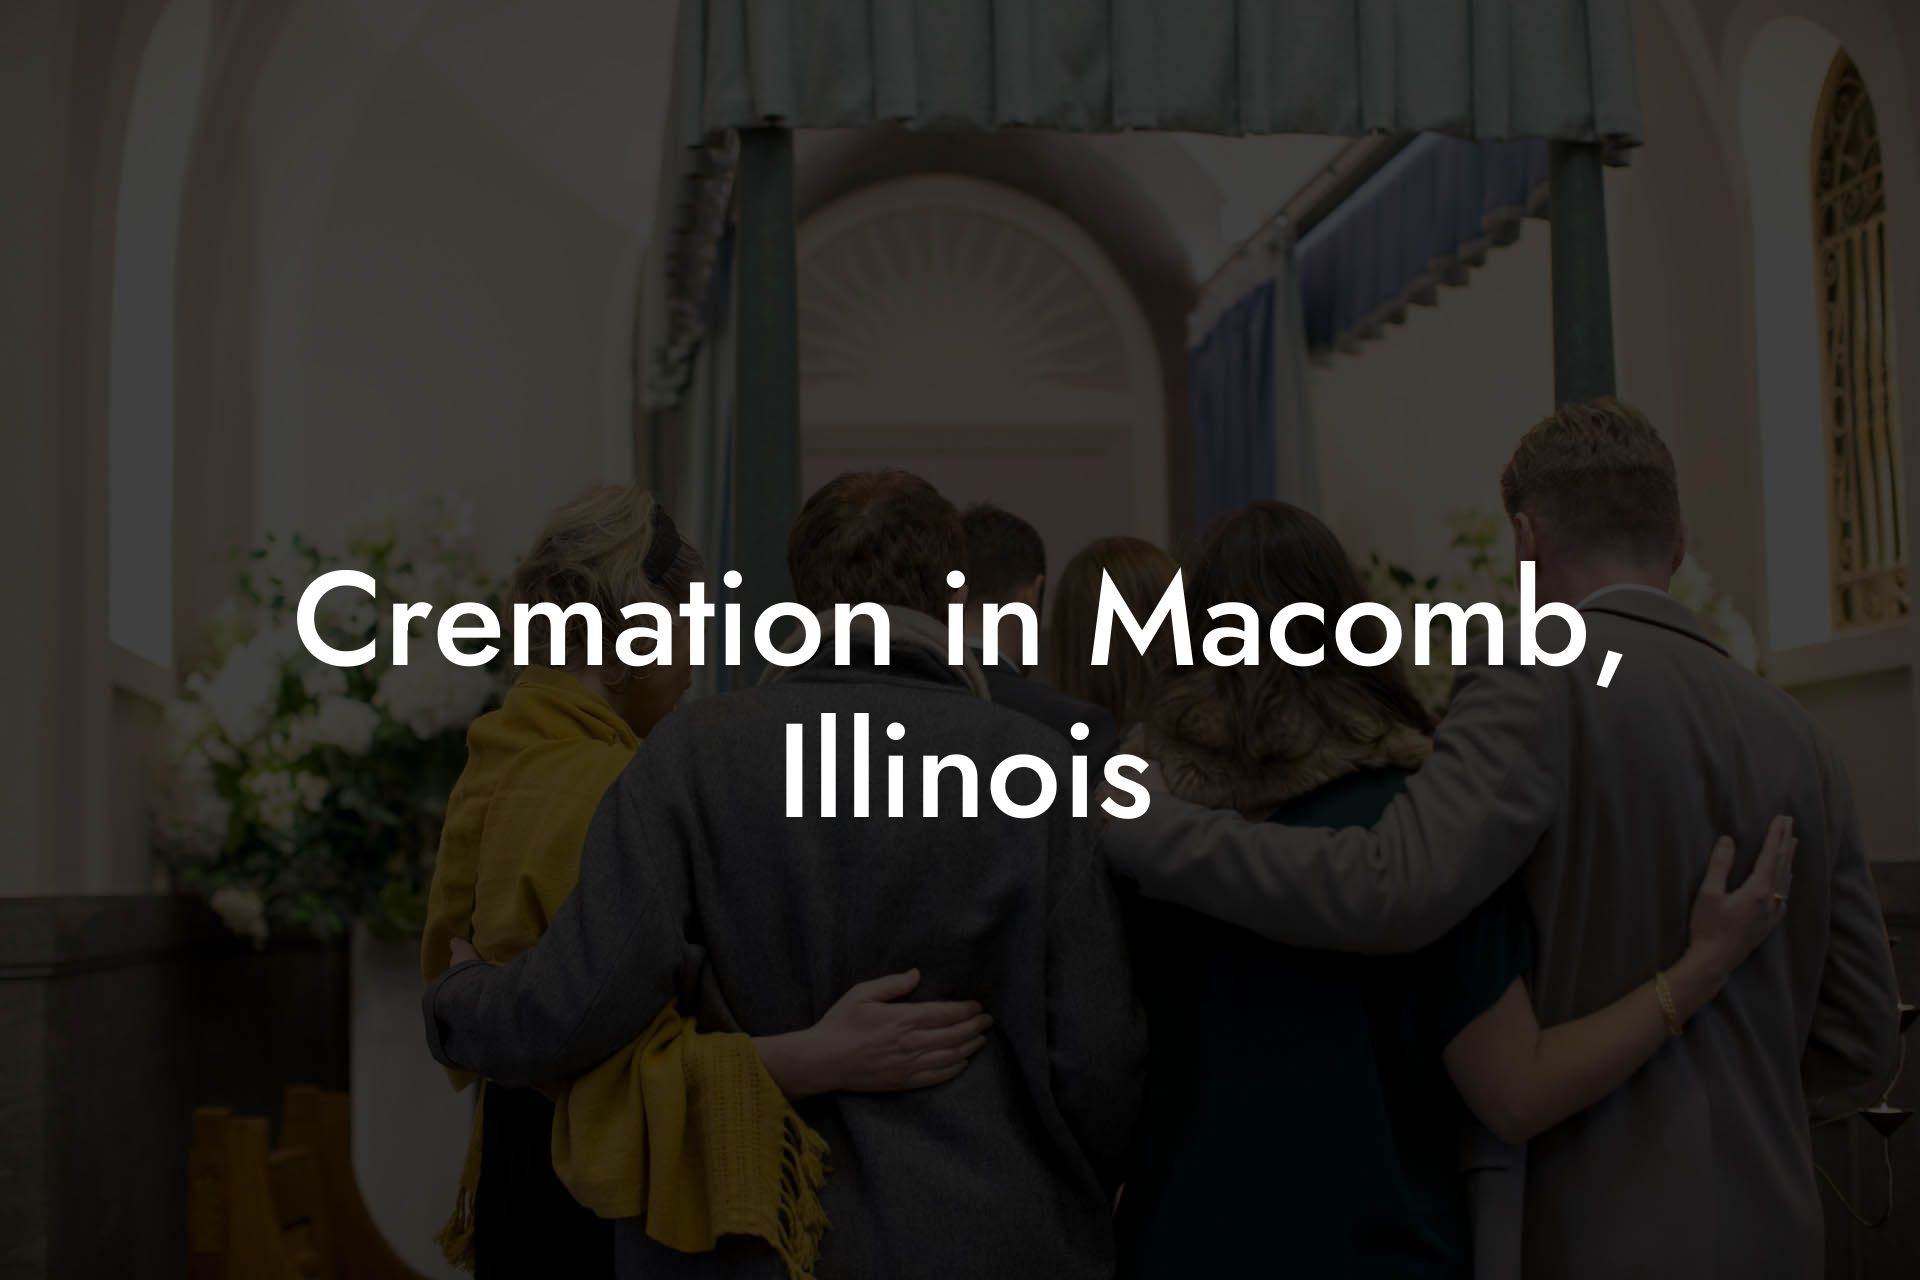 Cremation in Macomb, Illinois